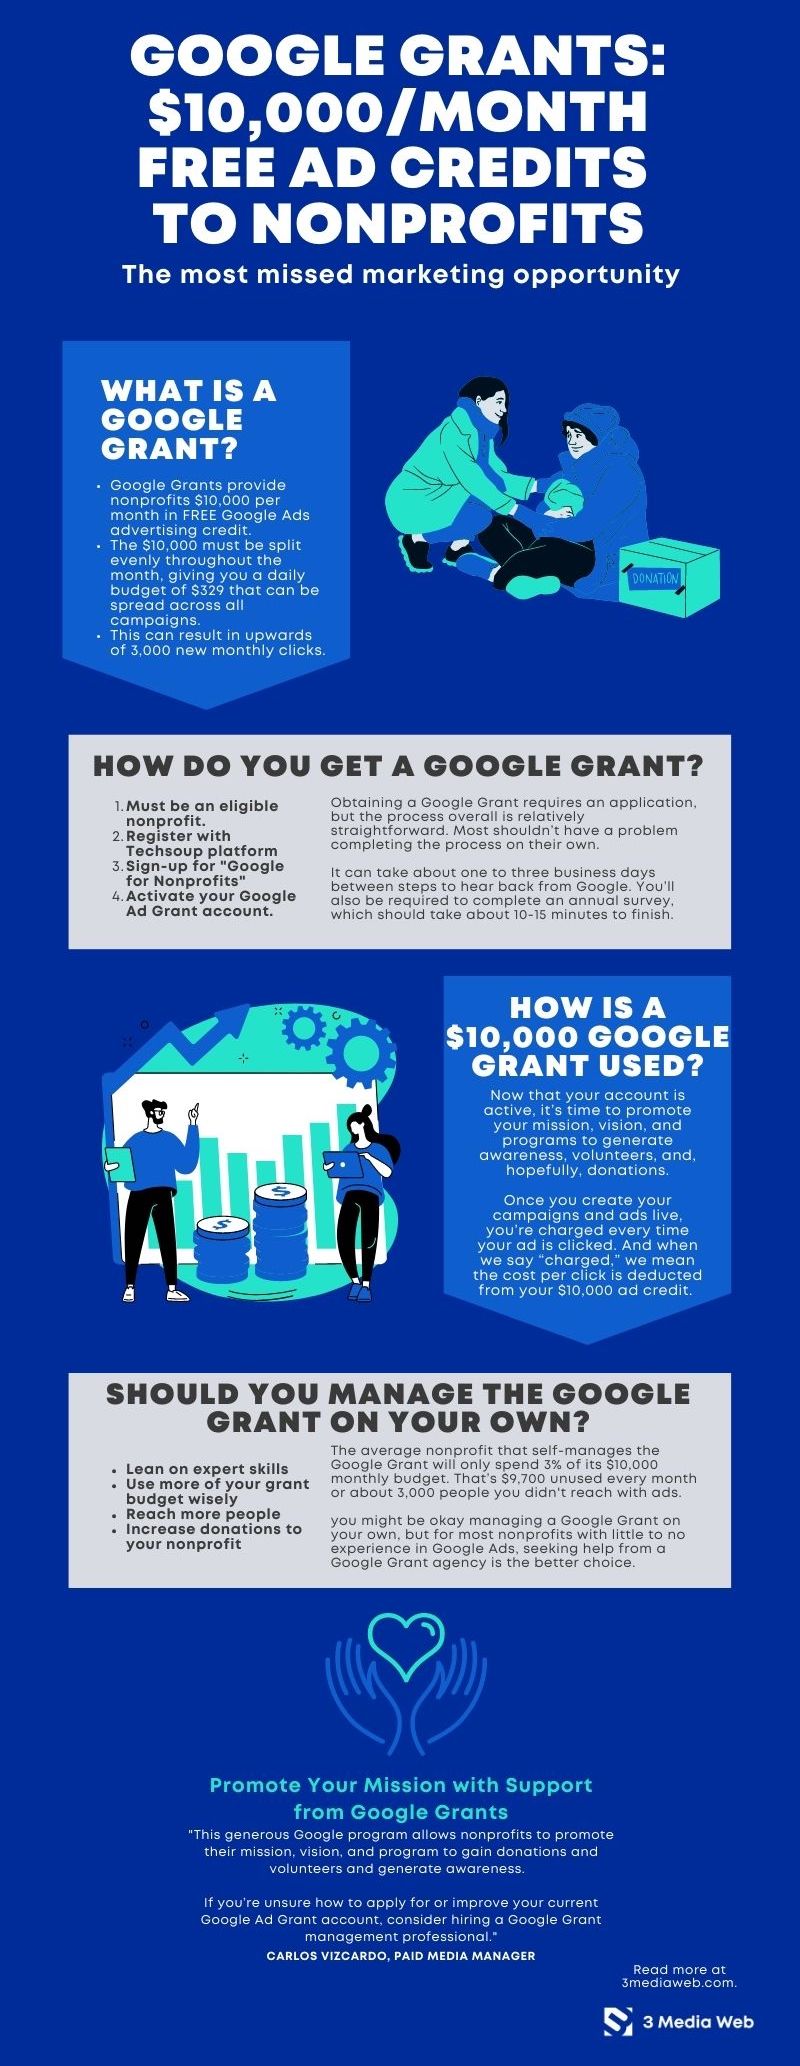 Find out if a Google Grant is a smart move for your Nonprofit. 